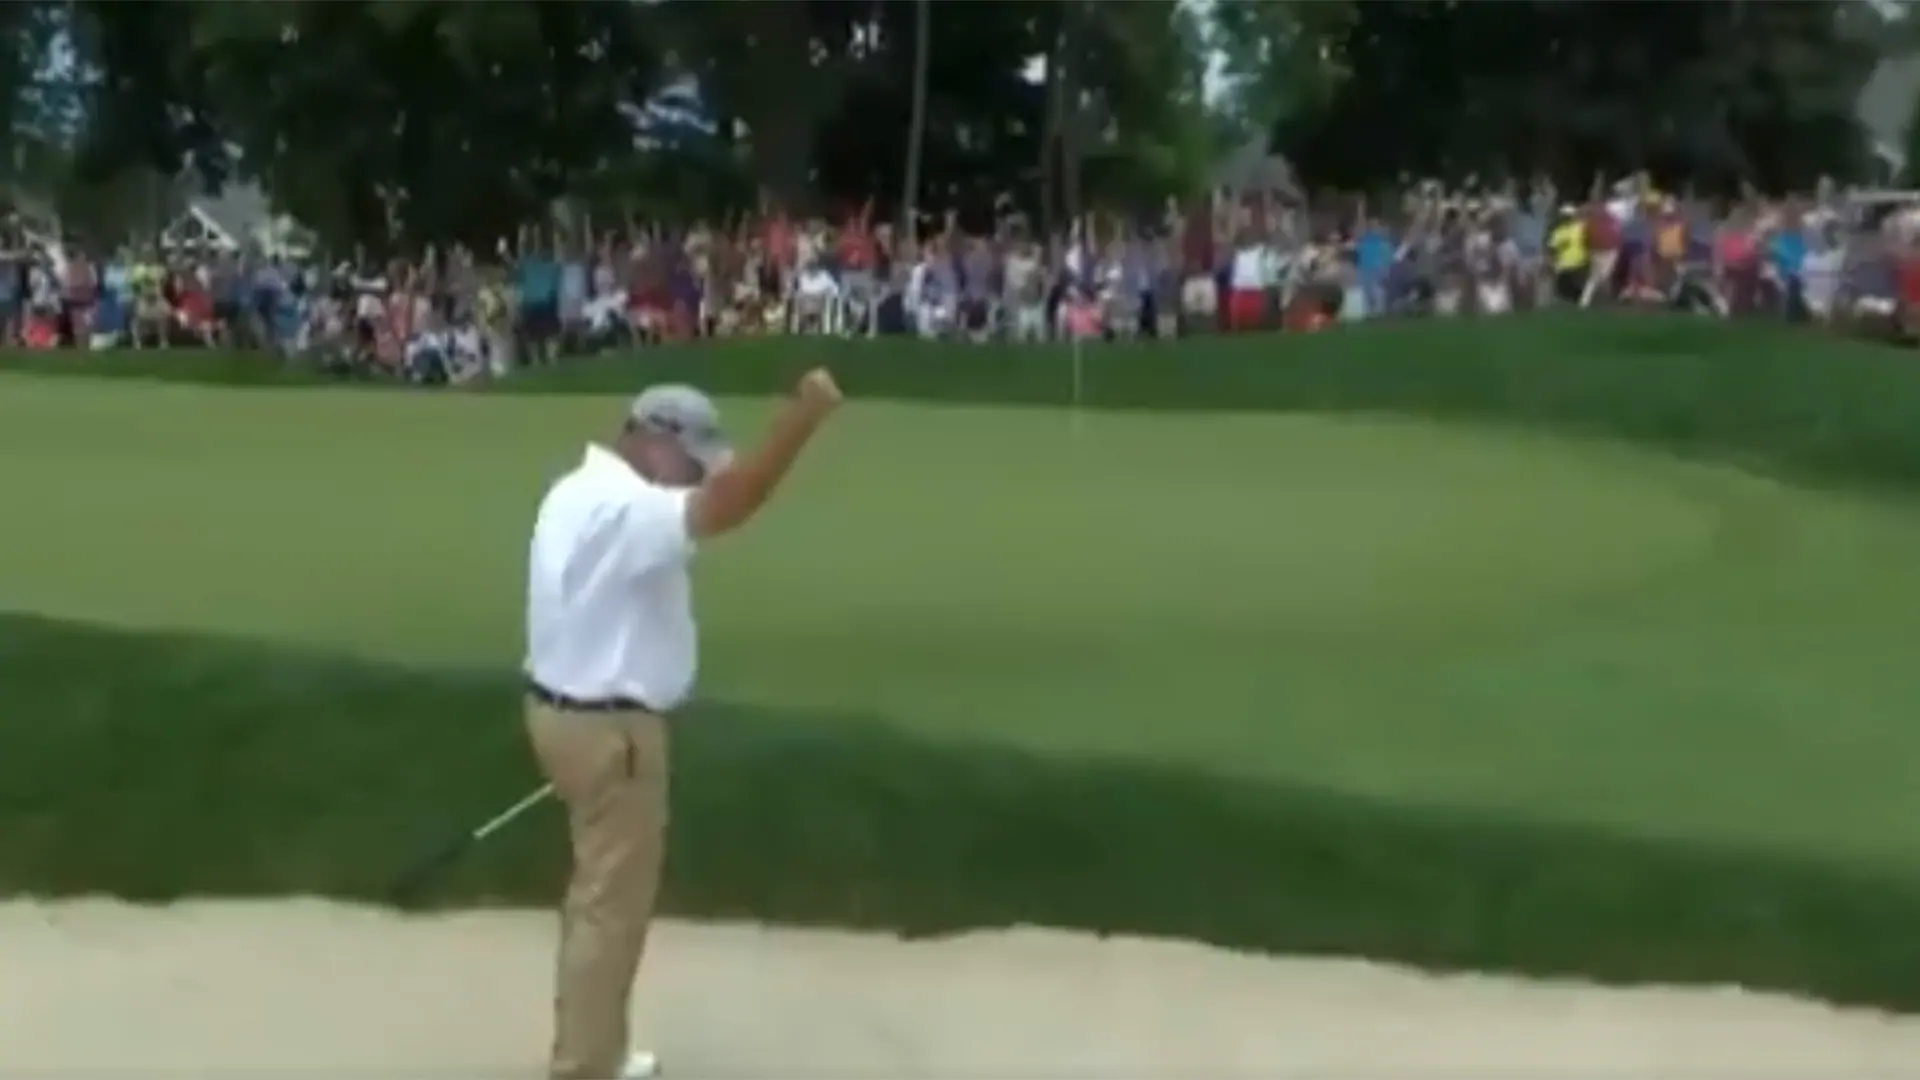 Watch: Weekley holes out for birdie from bunker